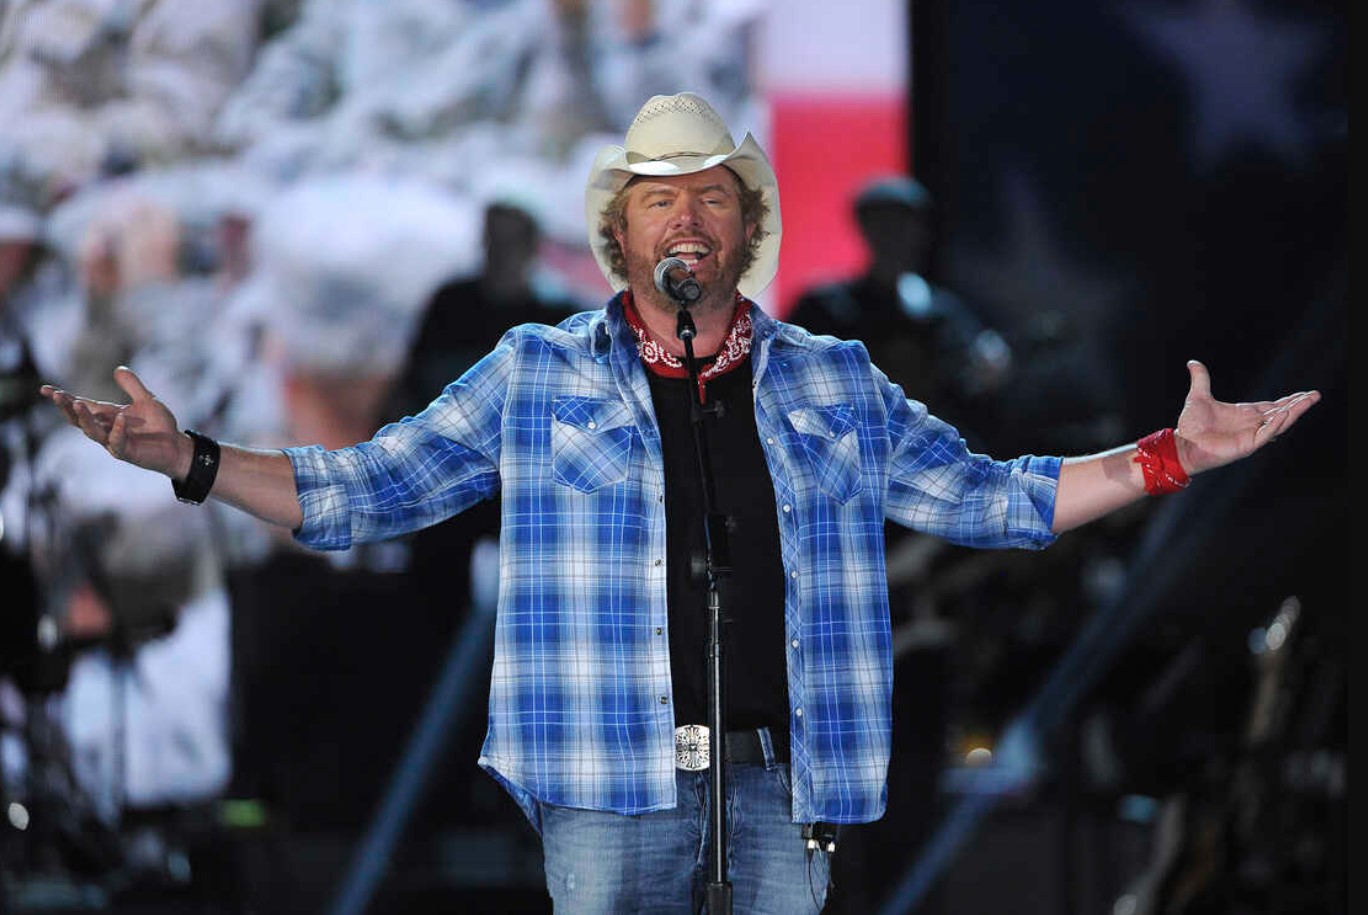 Legendary Country Star Toby Keith Passes Away at 62 After Battling Stomach Cancer: ‘Gone But Never Forgotten’